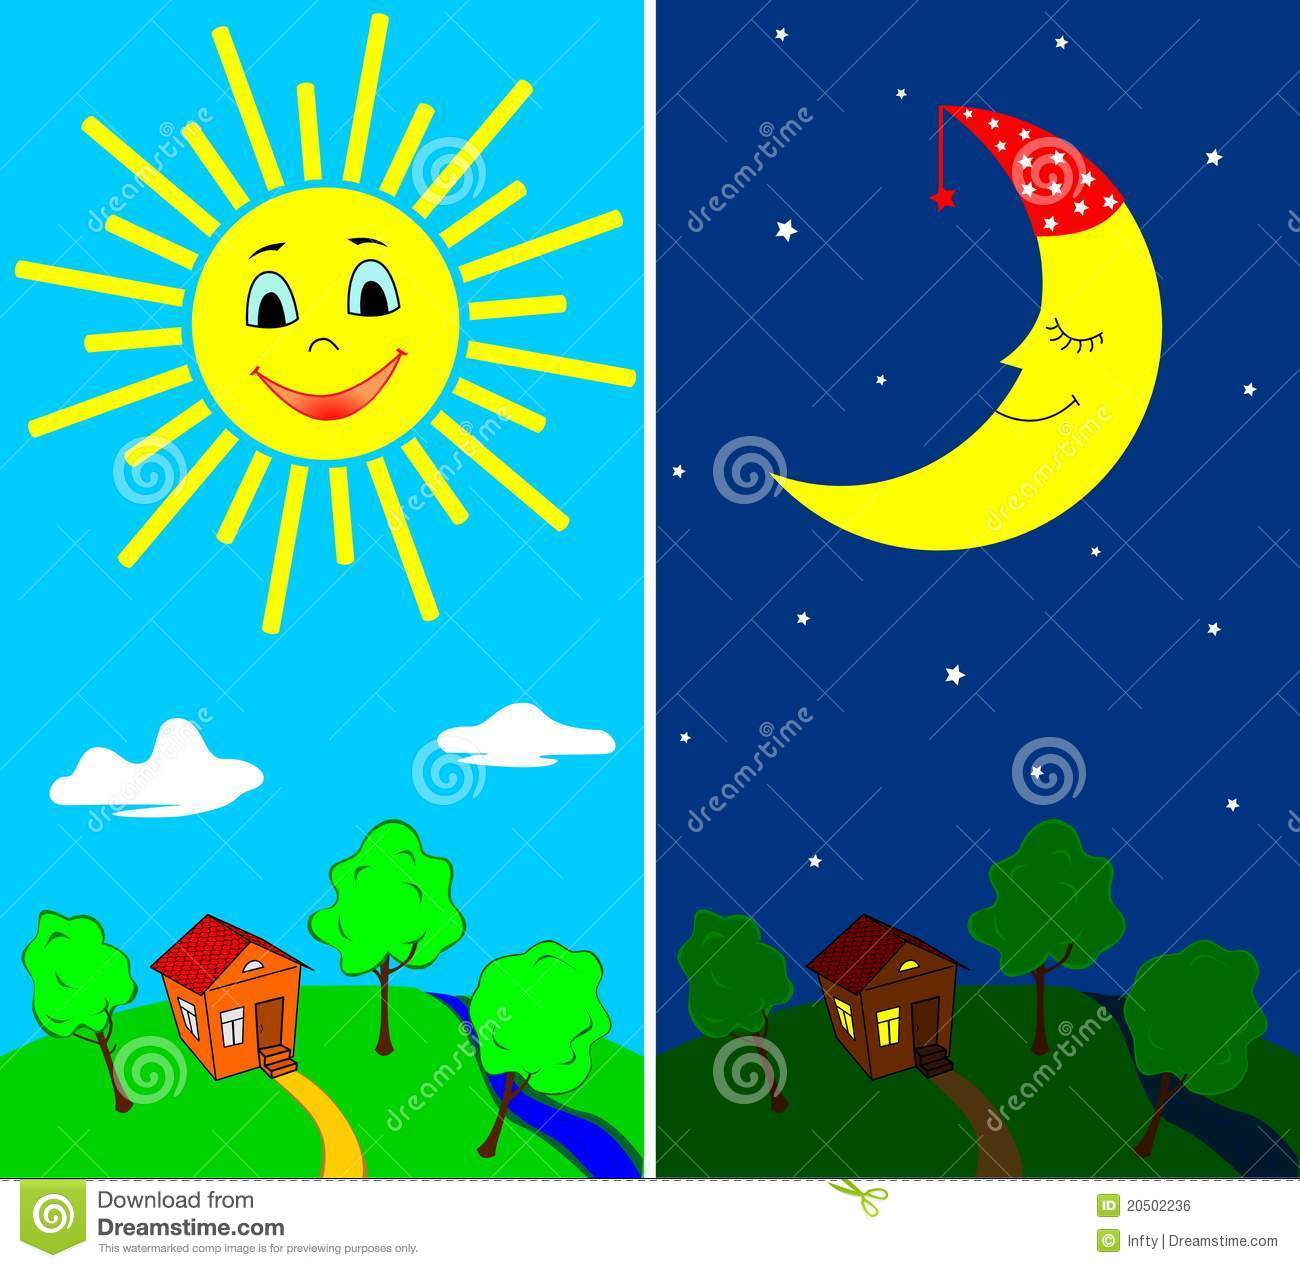 Countryside View In The Daytime And Nighttime With The Sun And The